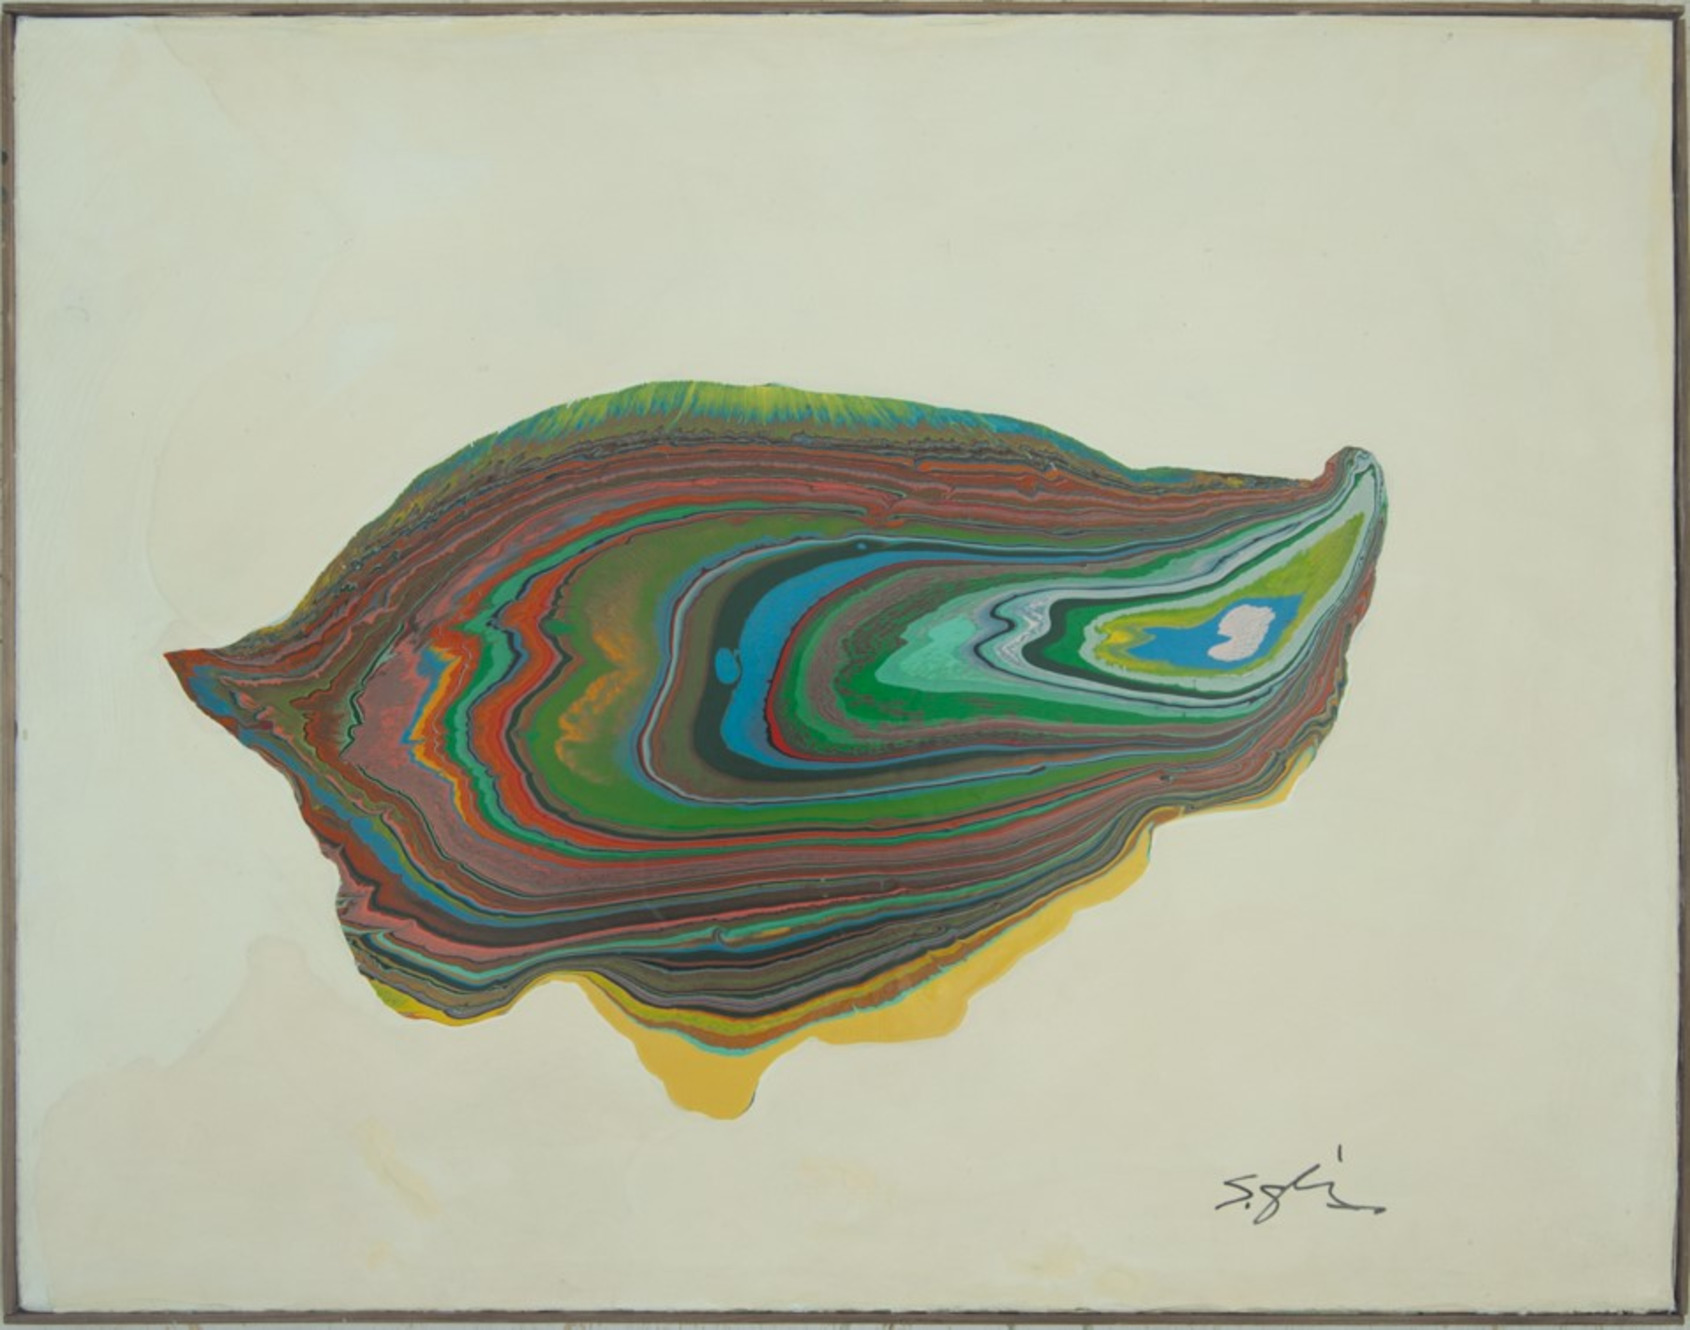  WHIRLPOOL, 1967, 93x118 cm. Private collection